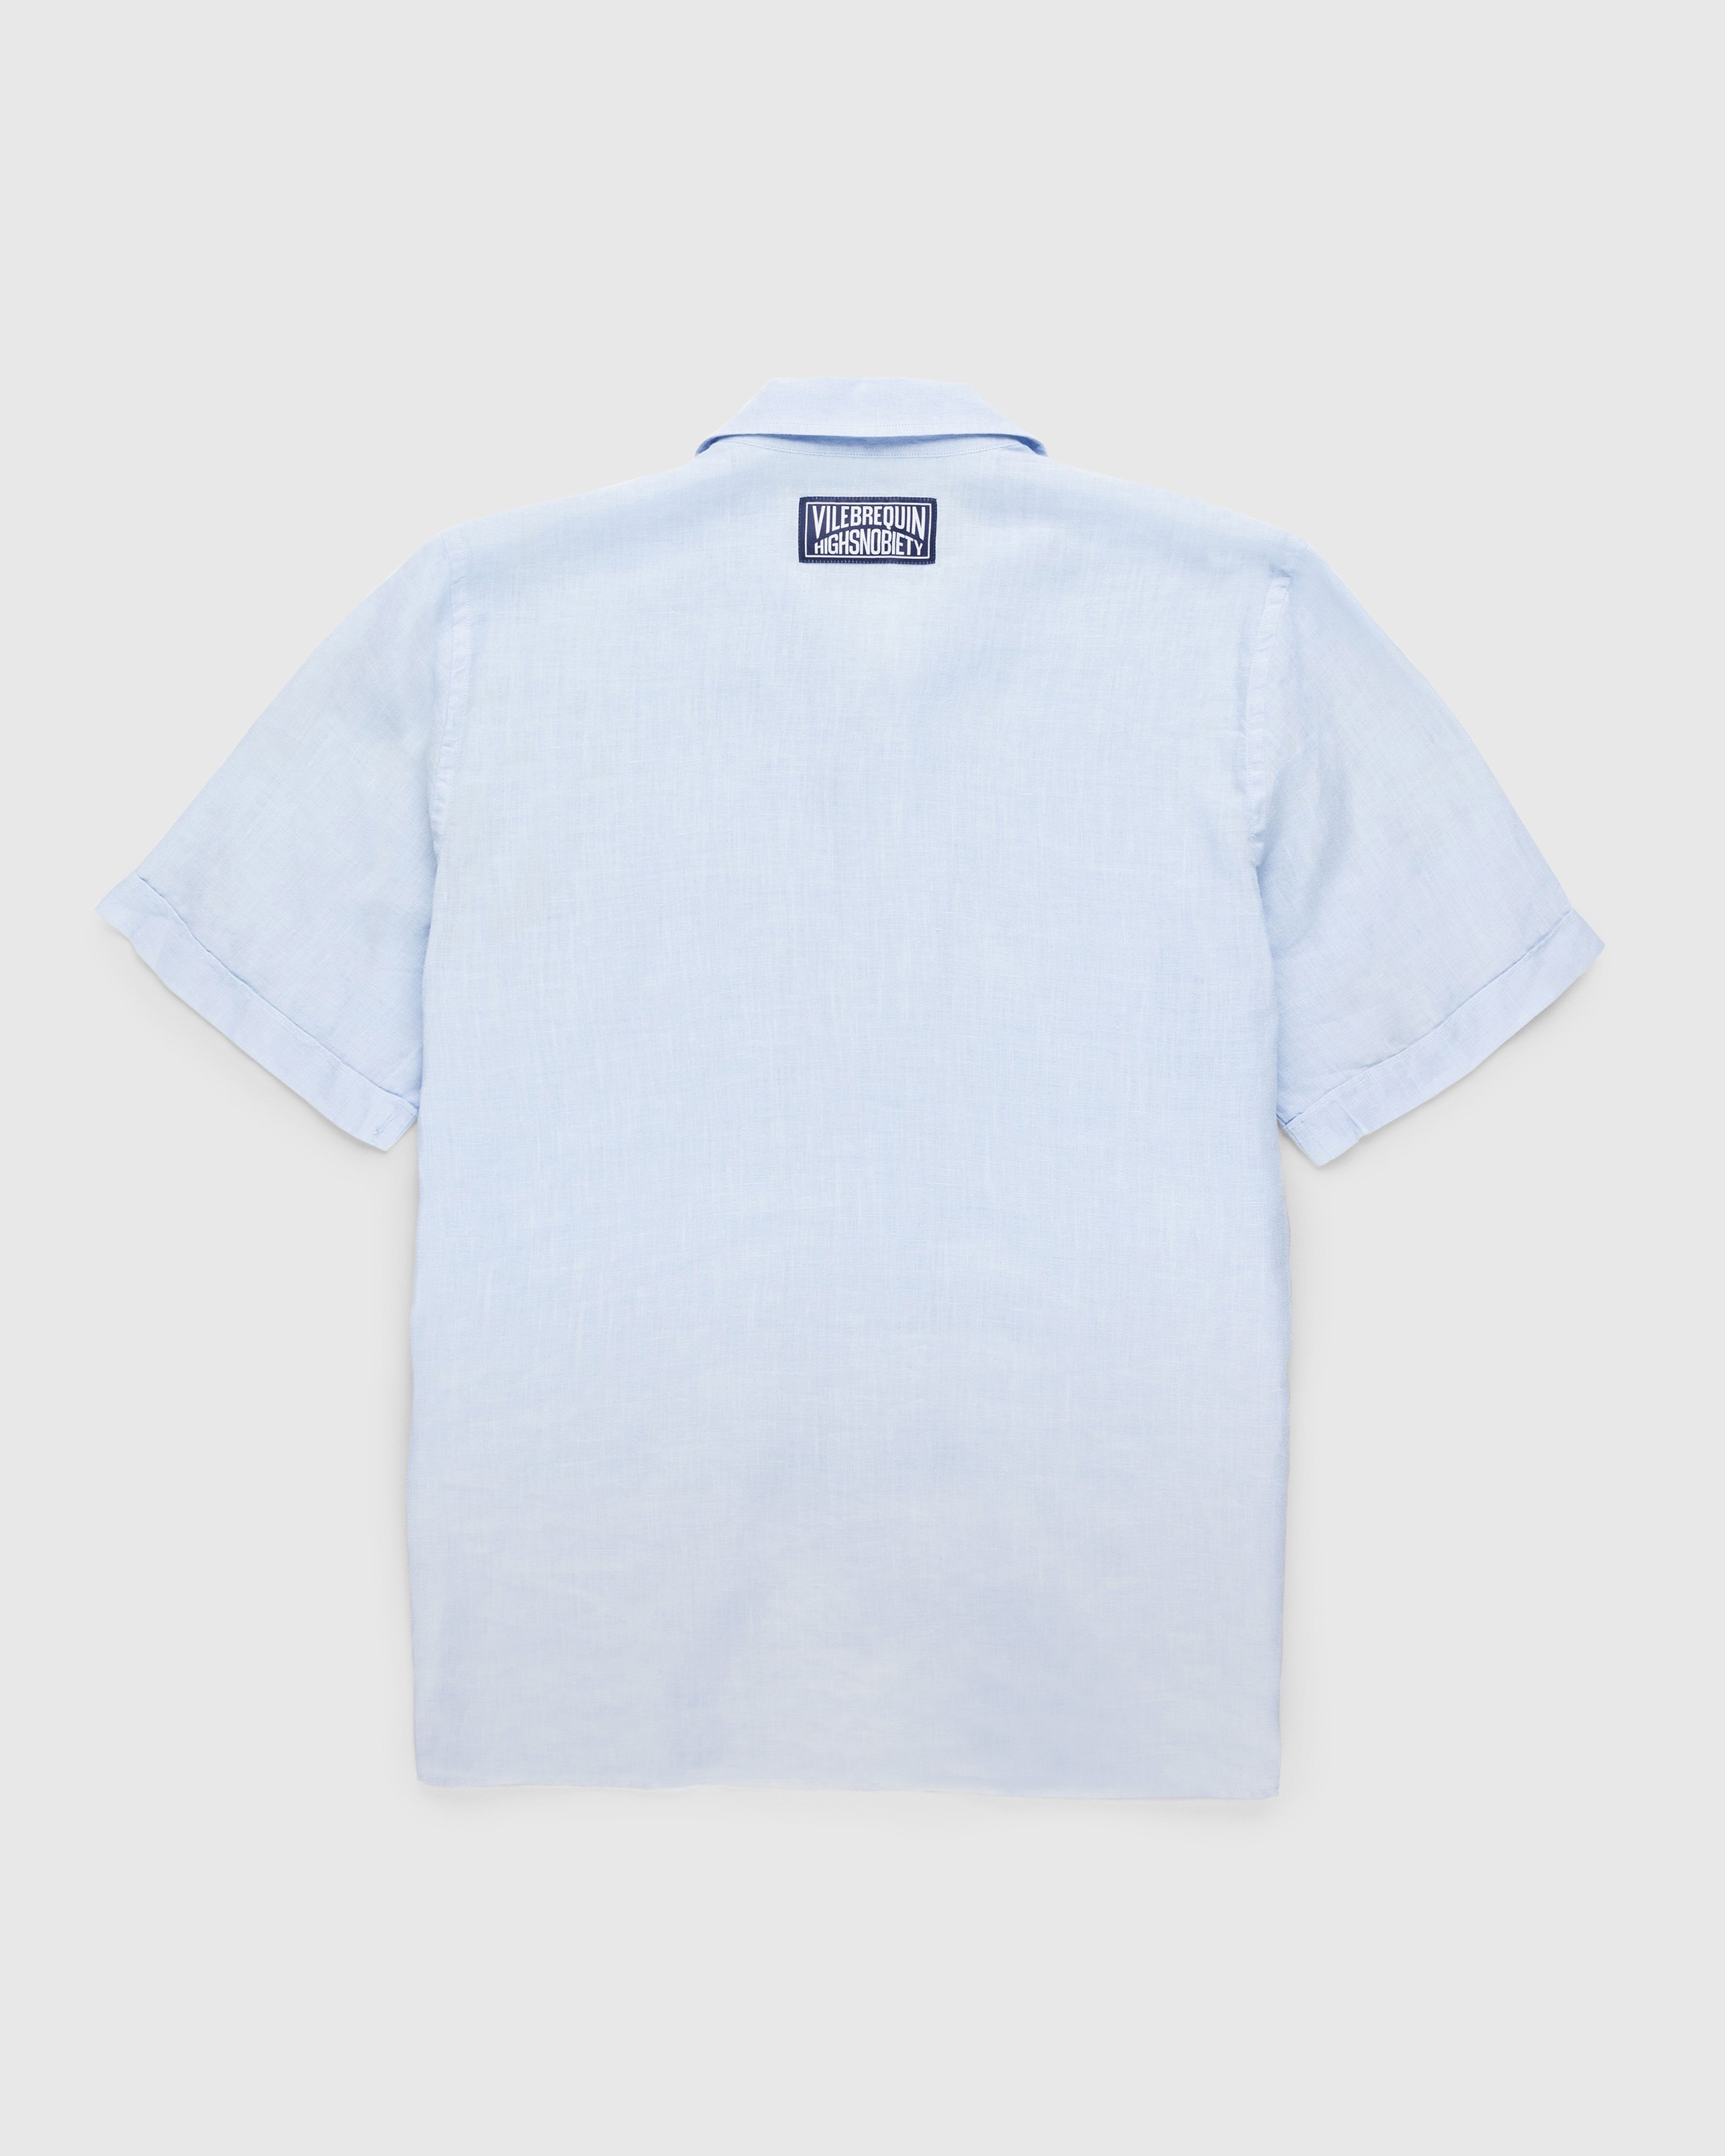 Vilebrequin x Highsnobiety - Solid Bowling Shirt Chambray - Clothing - Blue - Image 2